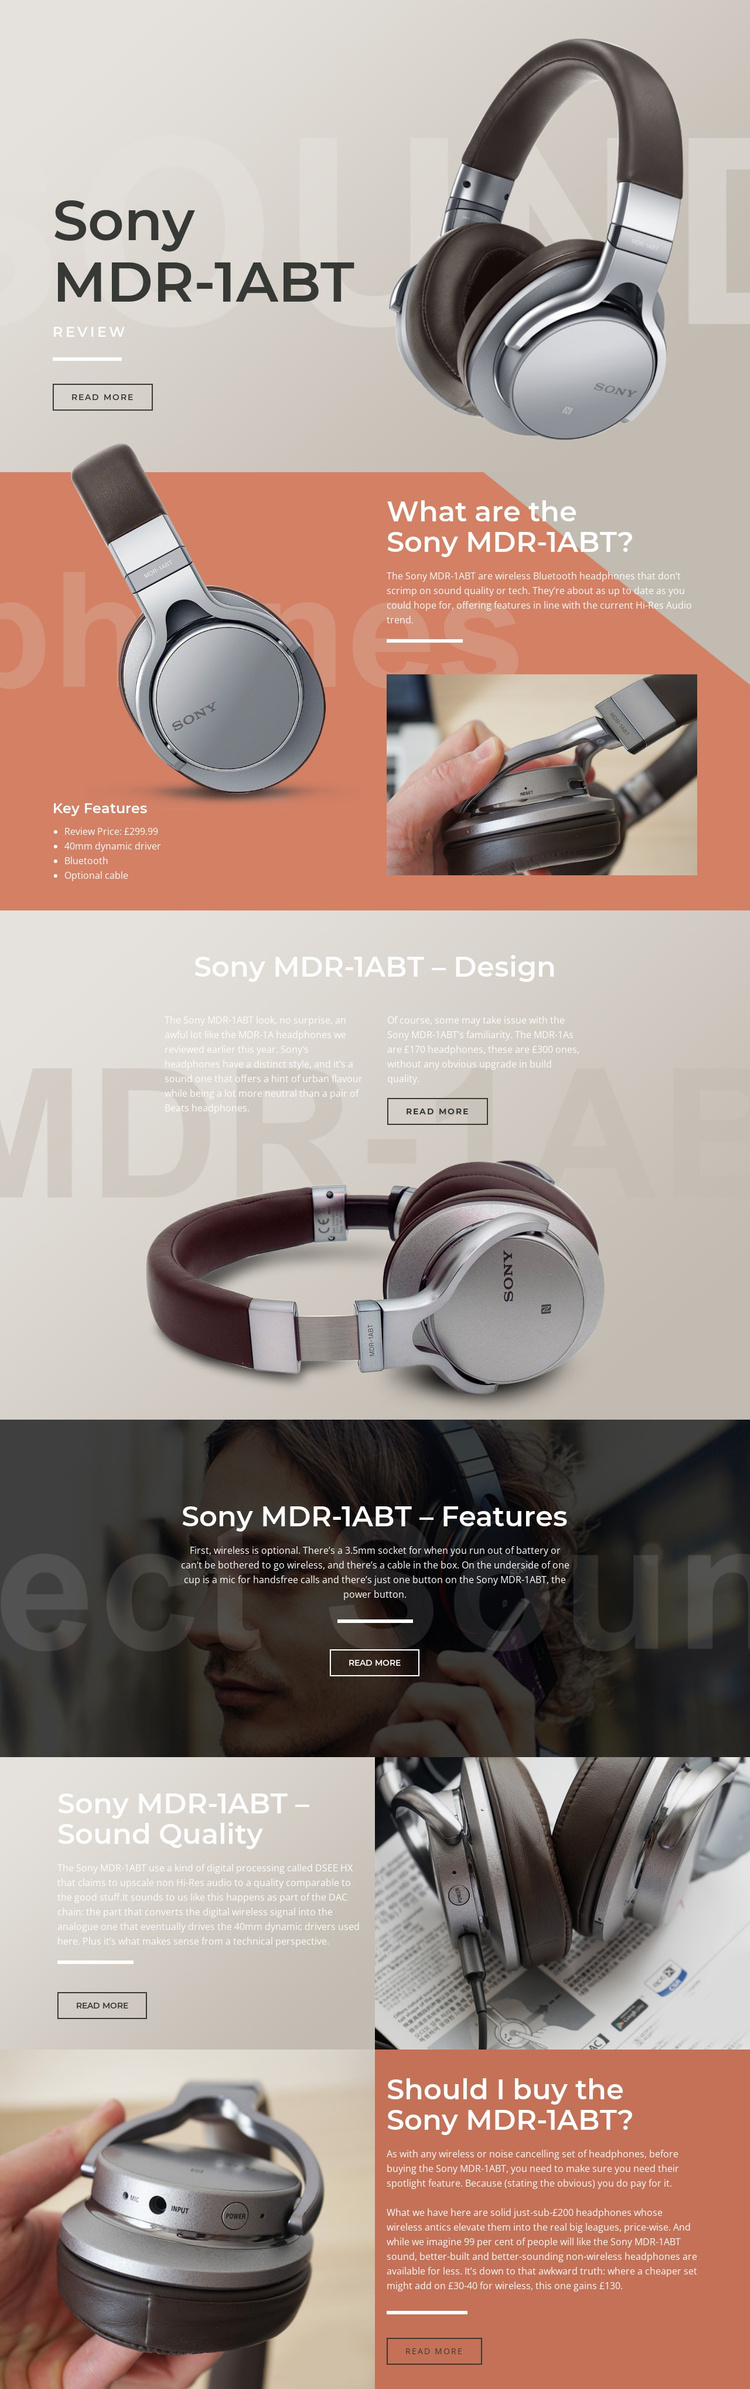 Listening your favorite music Website Template